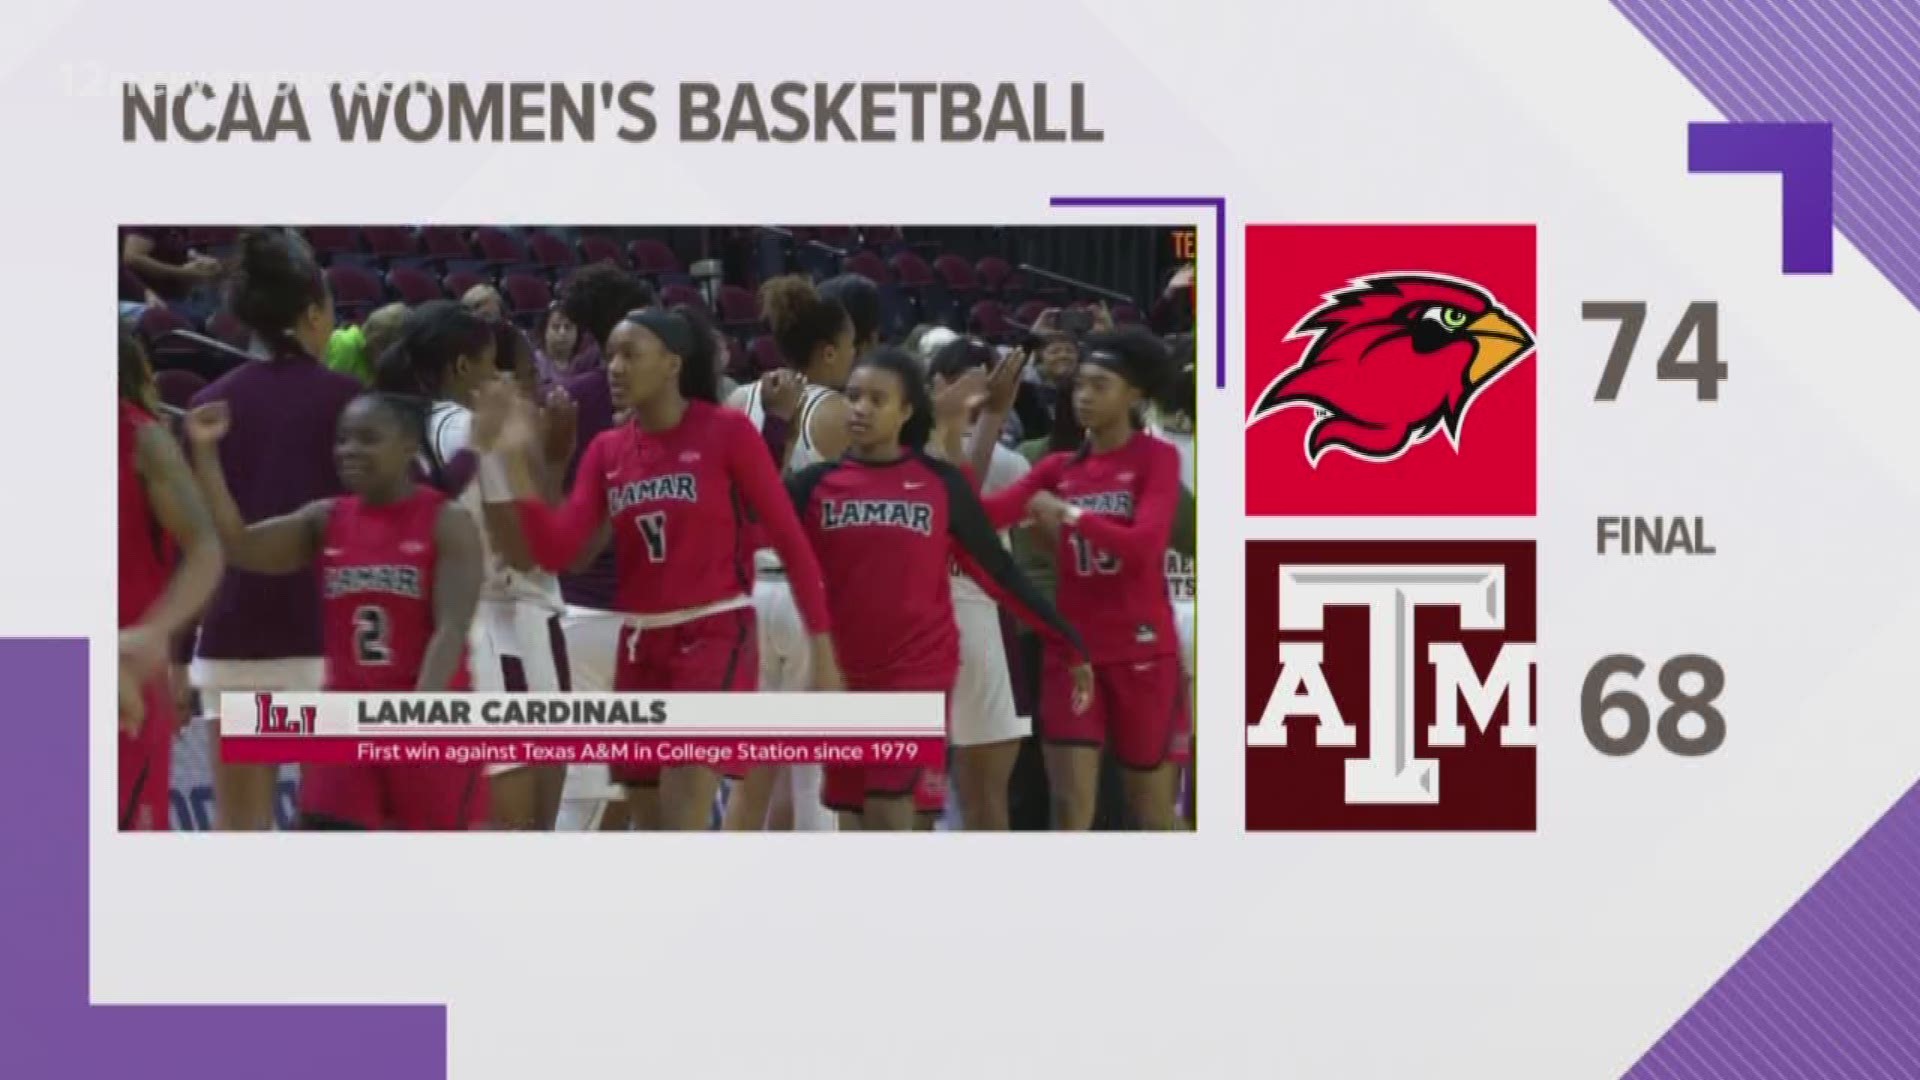 Big win for the Cardinals to go to College Station and knock off a top 25 opponent.